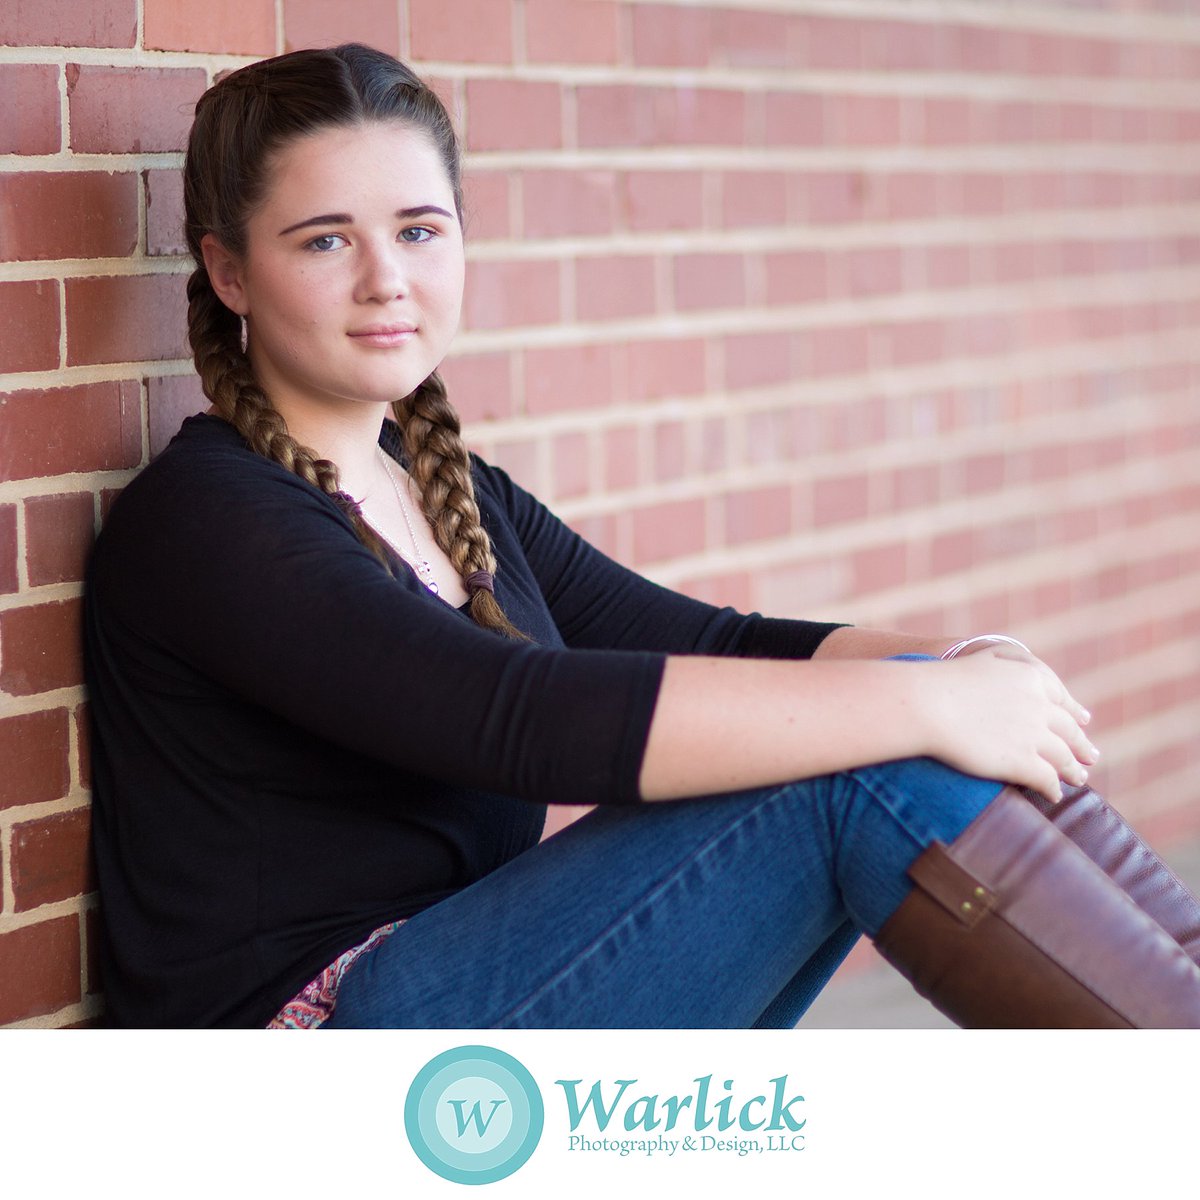 Downtown Raleigh's backdrops are definitely Instagram approved! #downtownRaleigh #Raleighphotos #Raleighphotography #teenphotography #highschoolphotography #portraitphotos #portraitphotography #Raleighportraits #RaleighNC #Raleigh #downtownphotography #ncphotographer